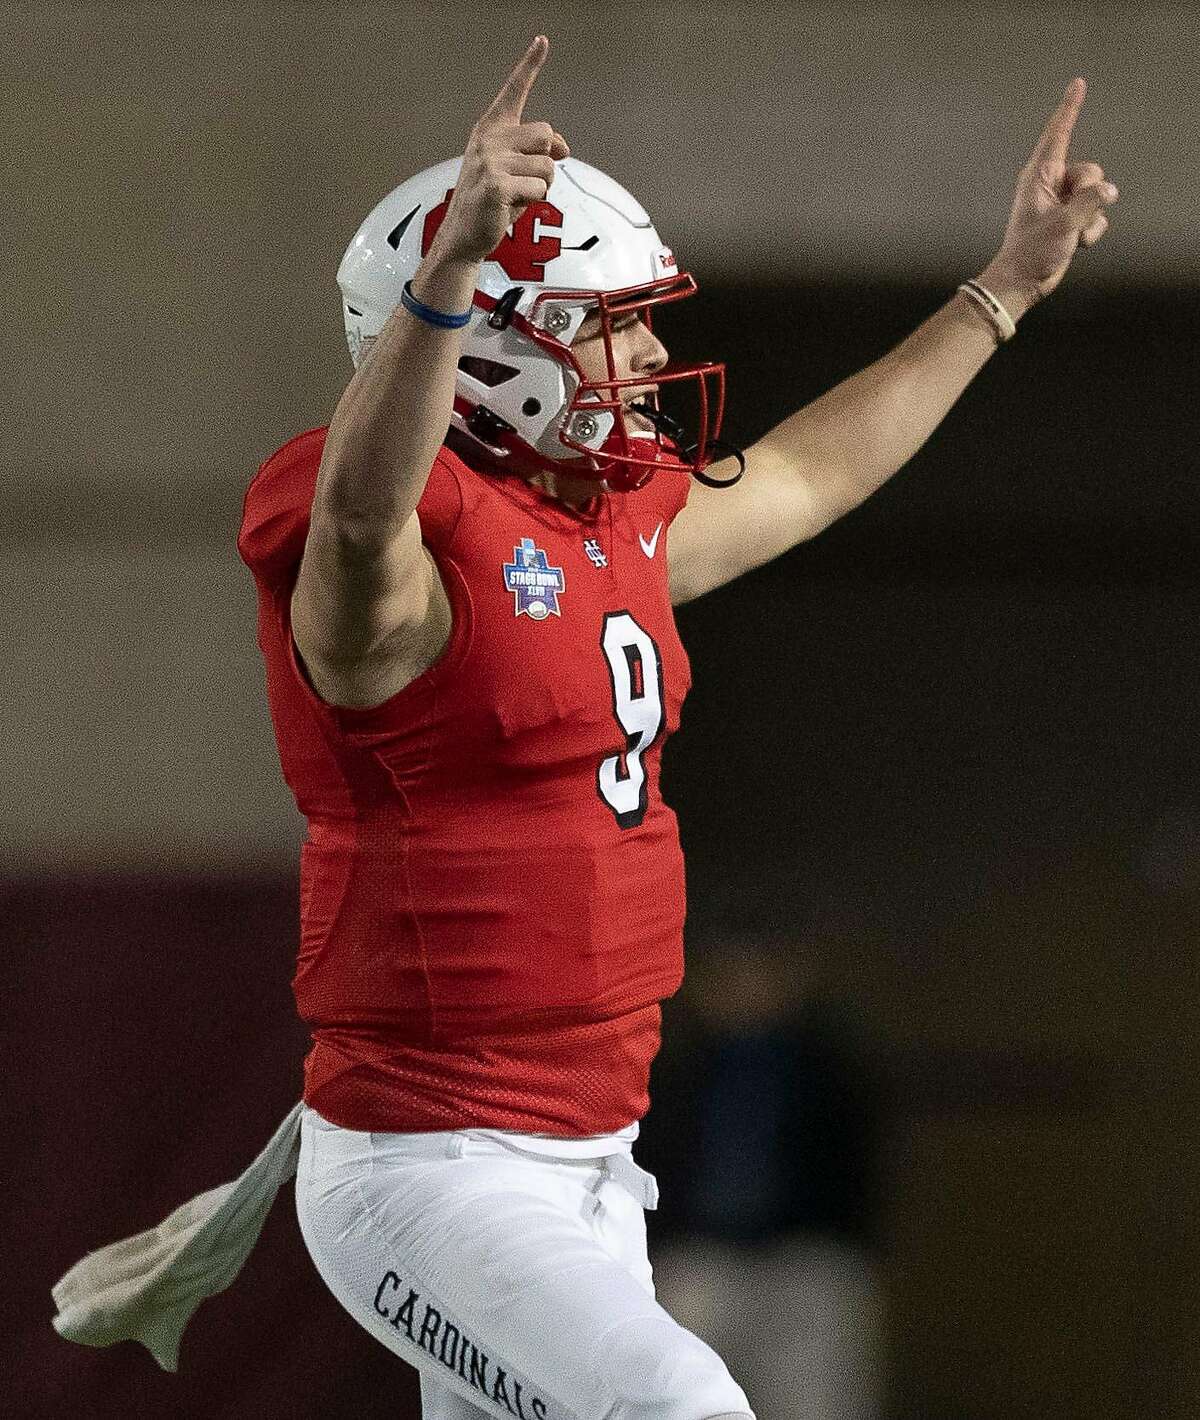 North Central College quarterback Broc Rutter (9) reacts after throwing a 31-yard touchdown pass to wide receiver Blake Williams during the first quarter of the NCAA Division III college football championship at Woodforest Bank Stadium, Friday, Dec. 20, 2019, in Shenandoah.